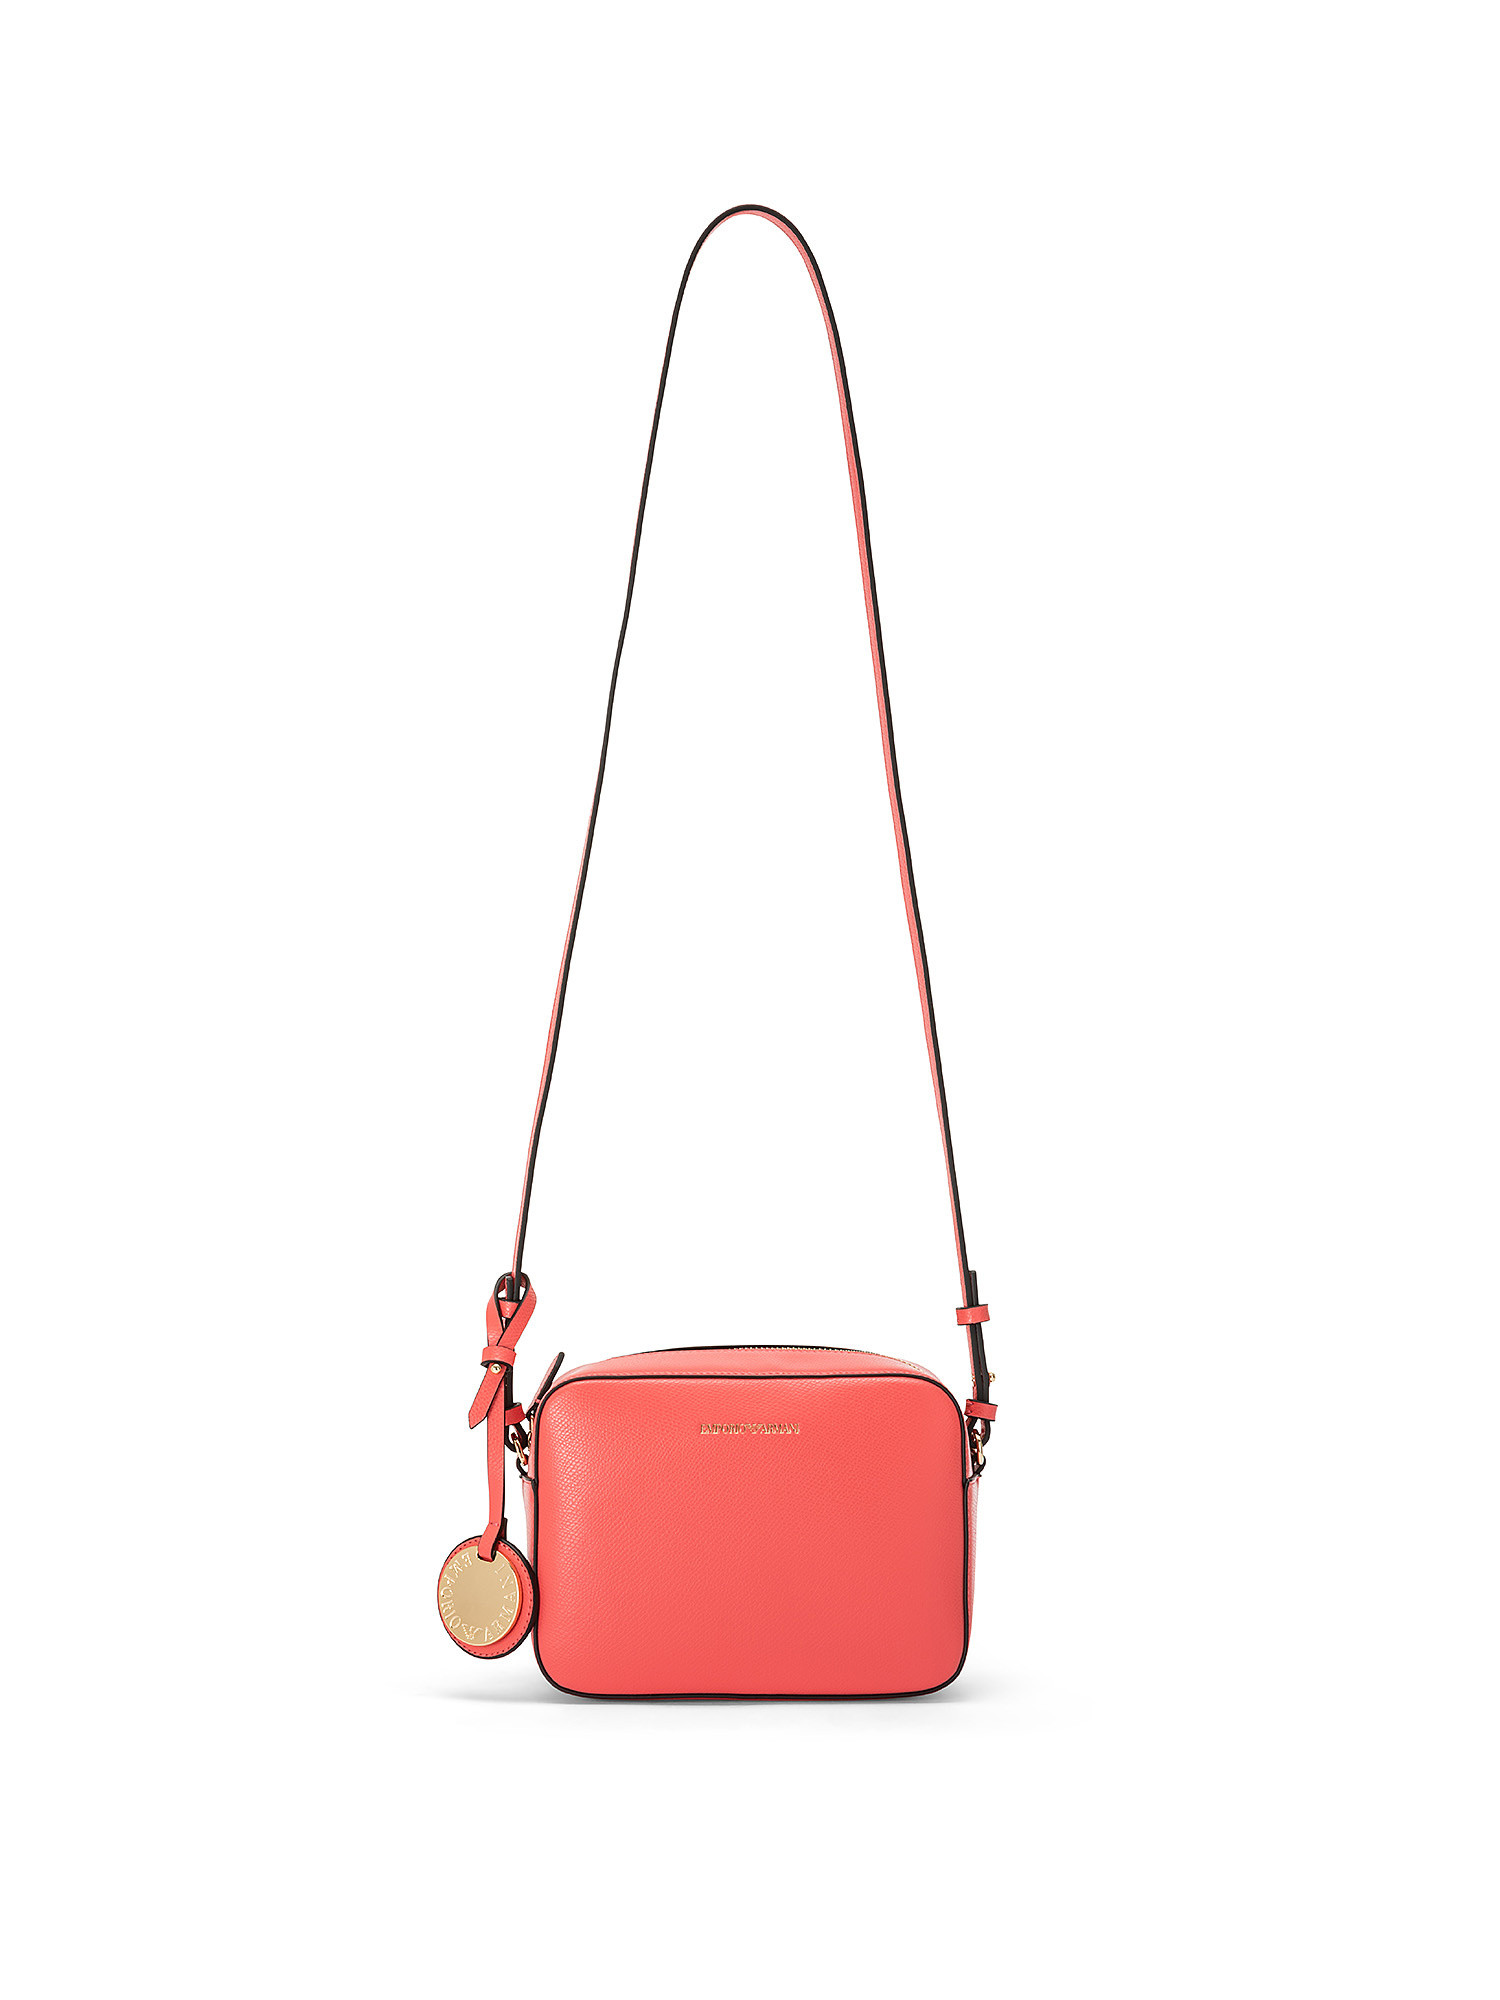 Mini bag, Rosso corallo, large image number 0